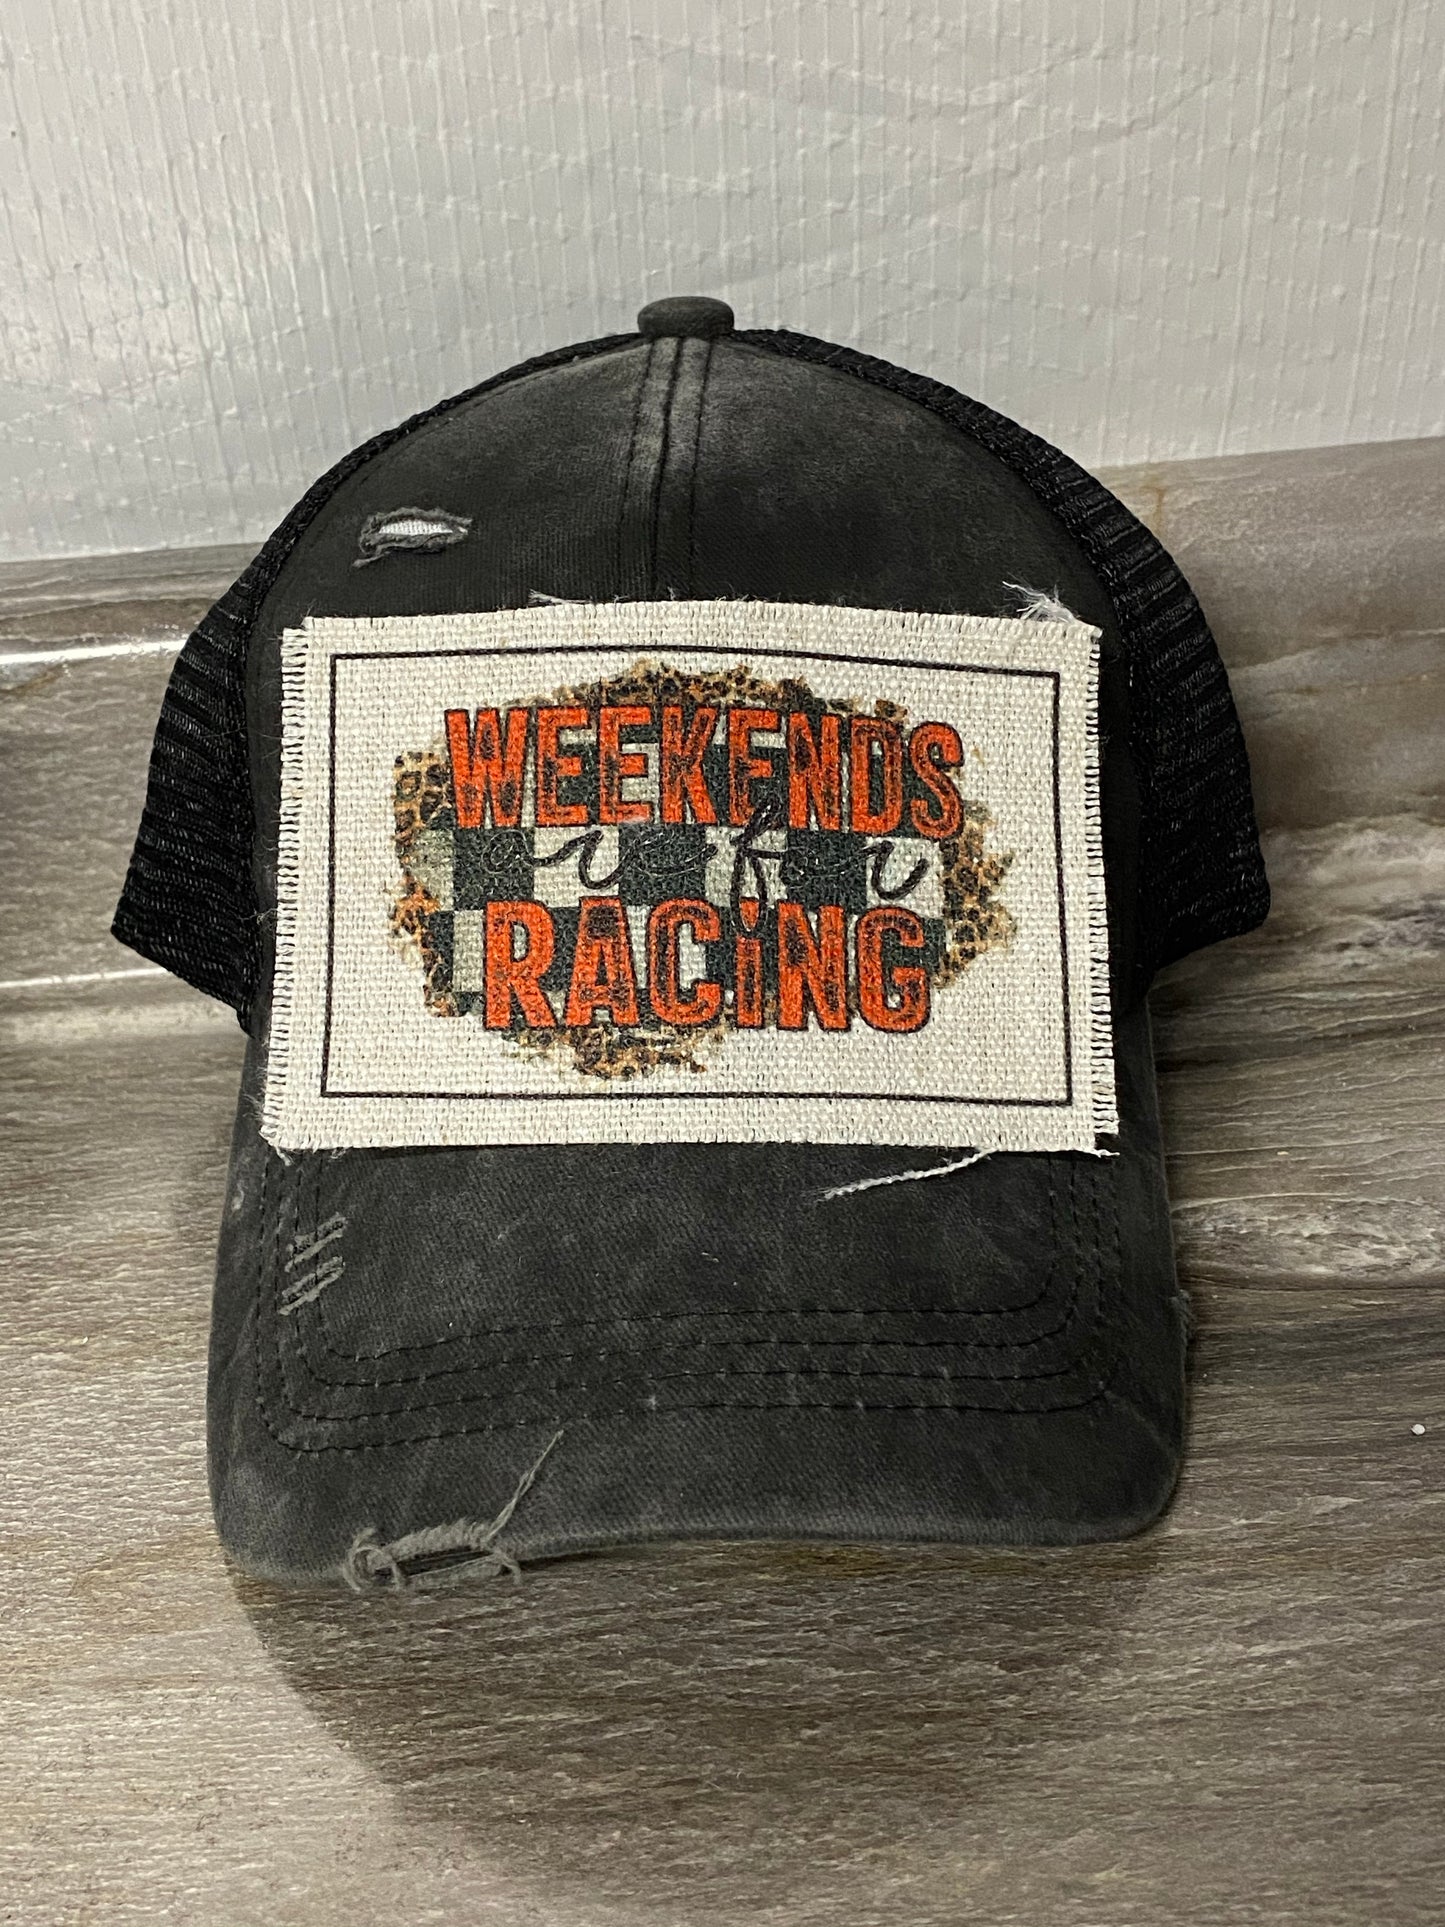 Weekends Are For Racing Hat Patch